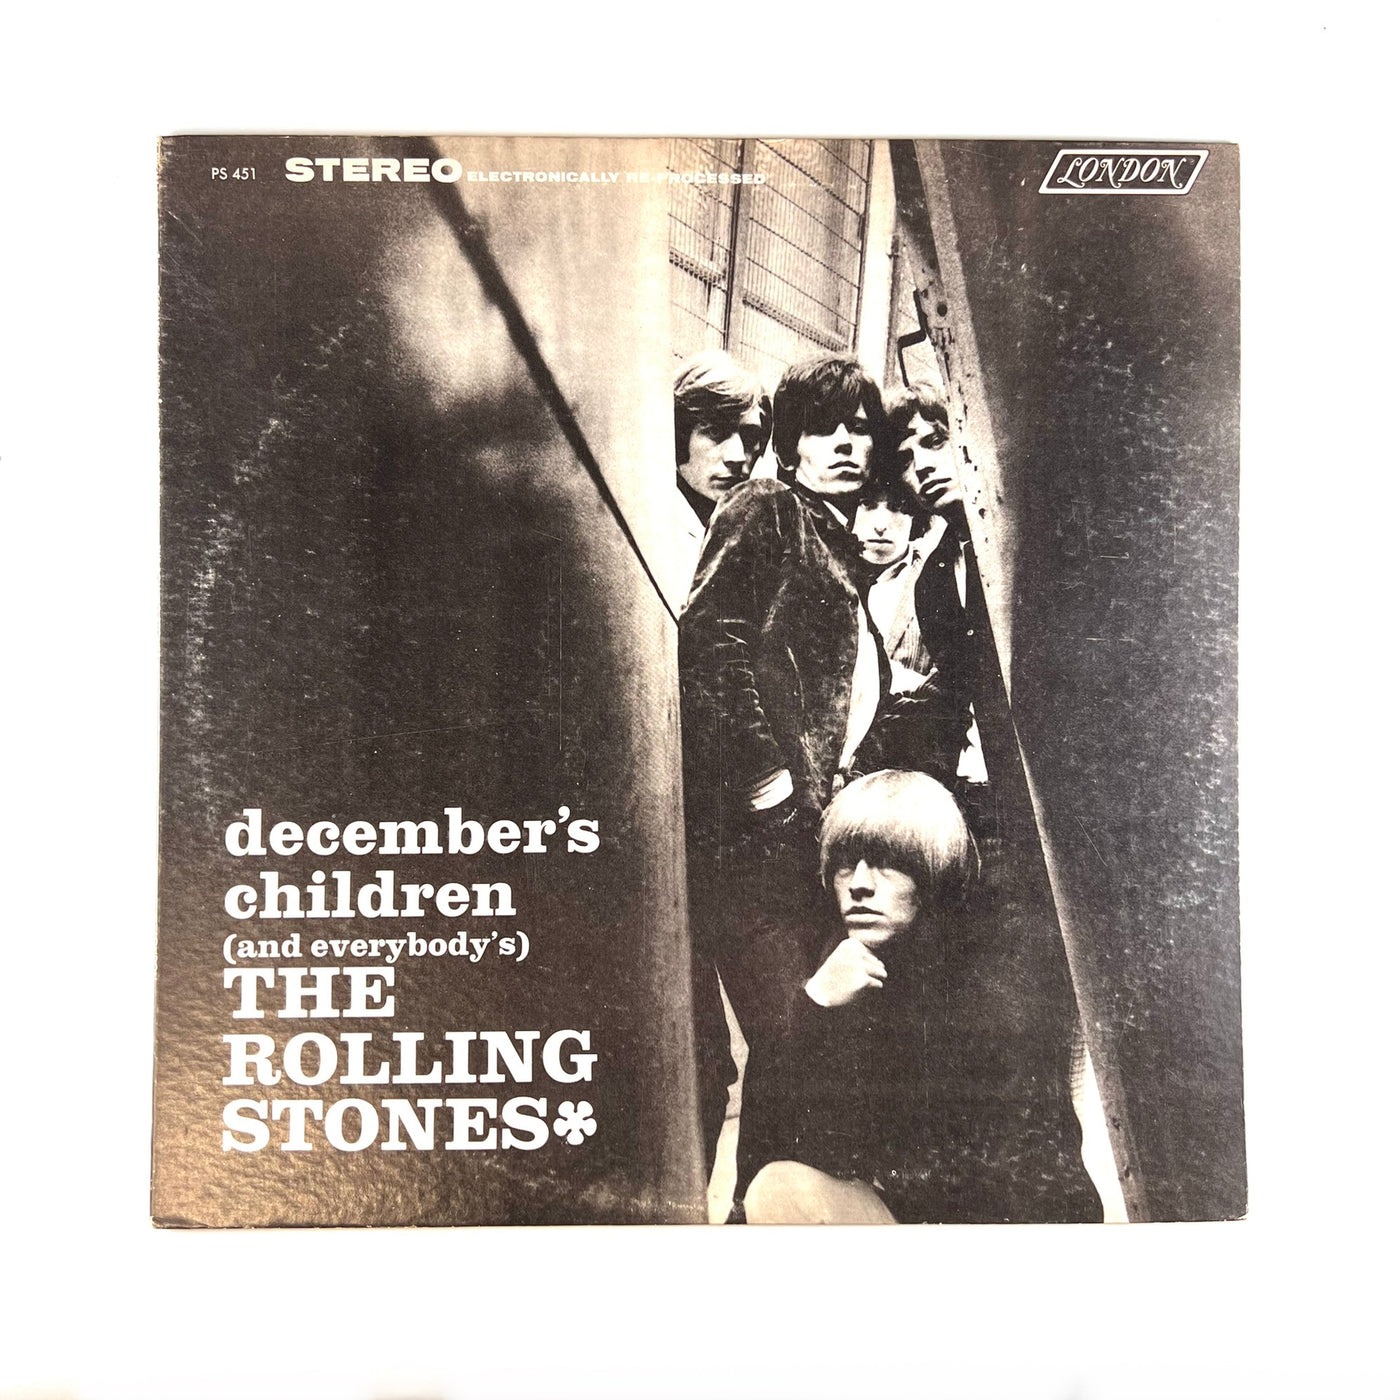 The Rolling Stones - December's Children (And Everybody's) - 1968 Repress